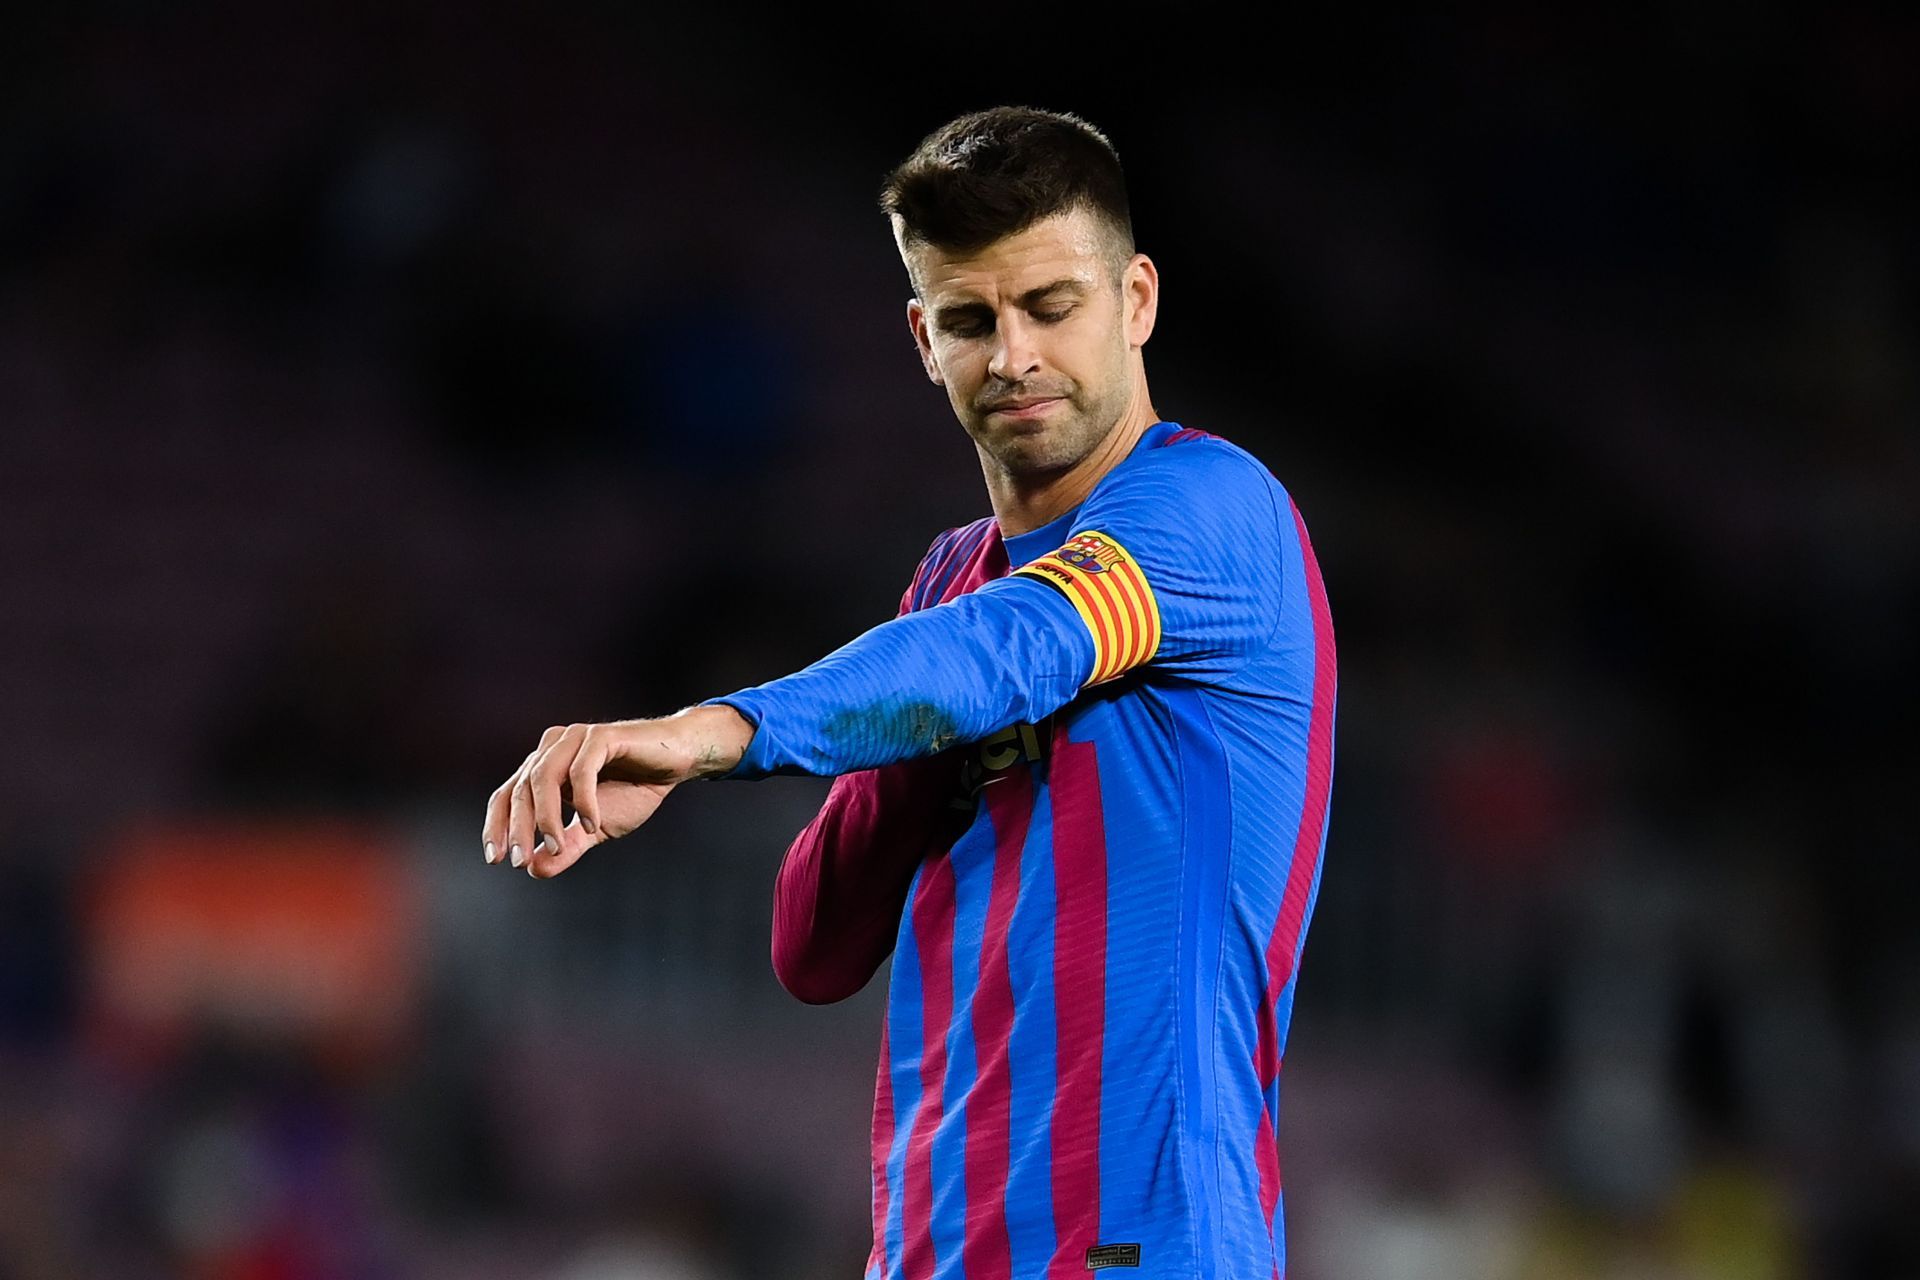 Pique has won many trophies at Barcelona